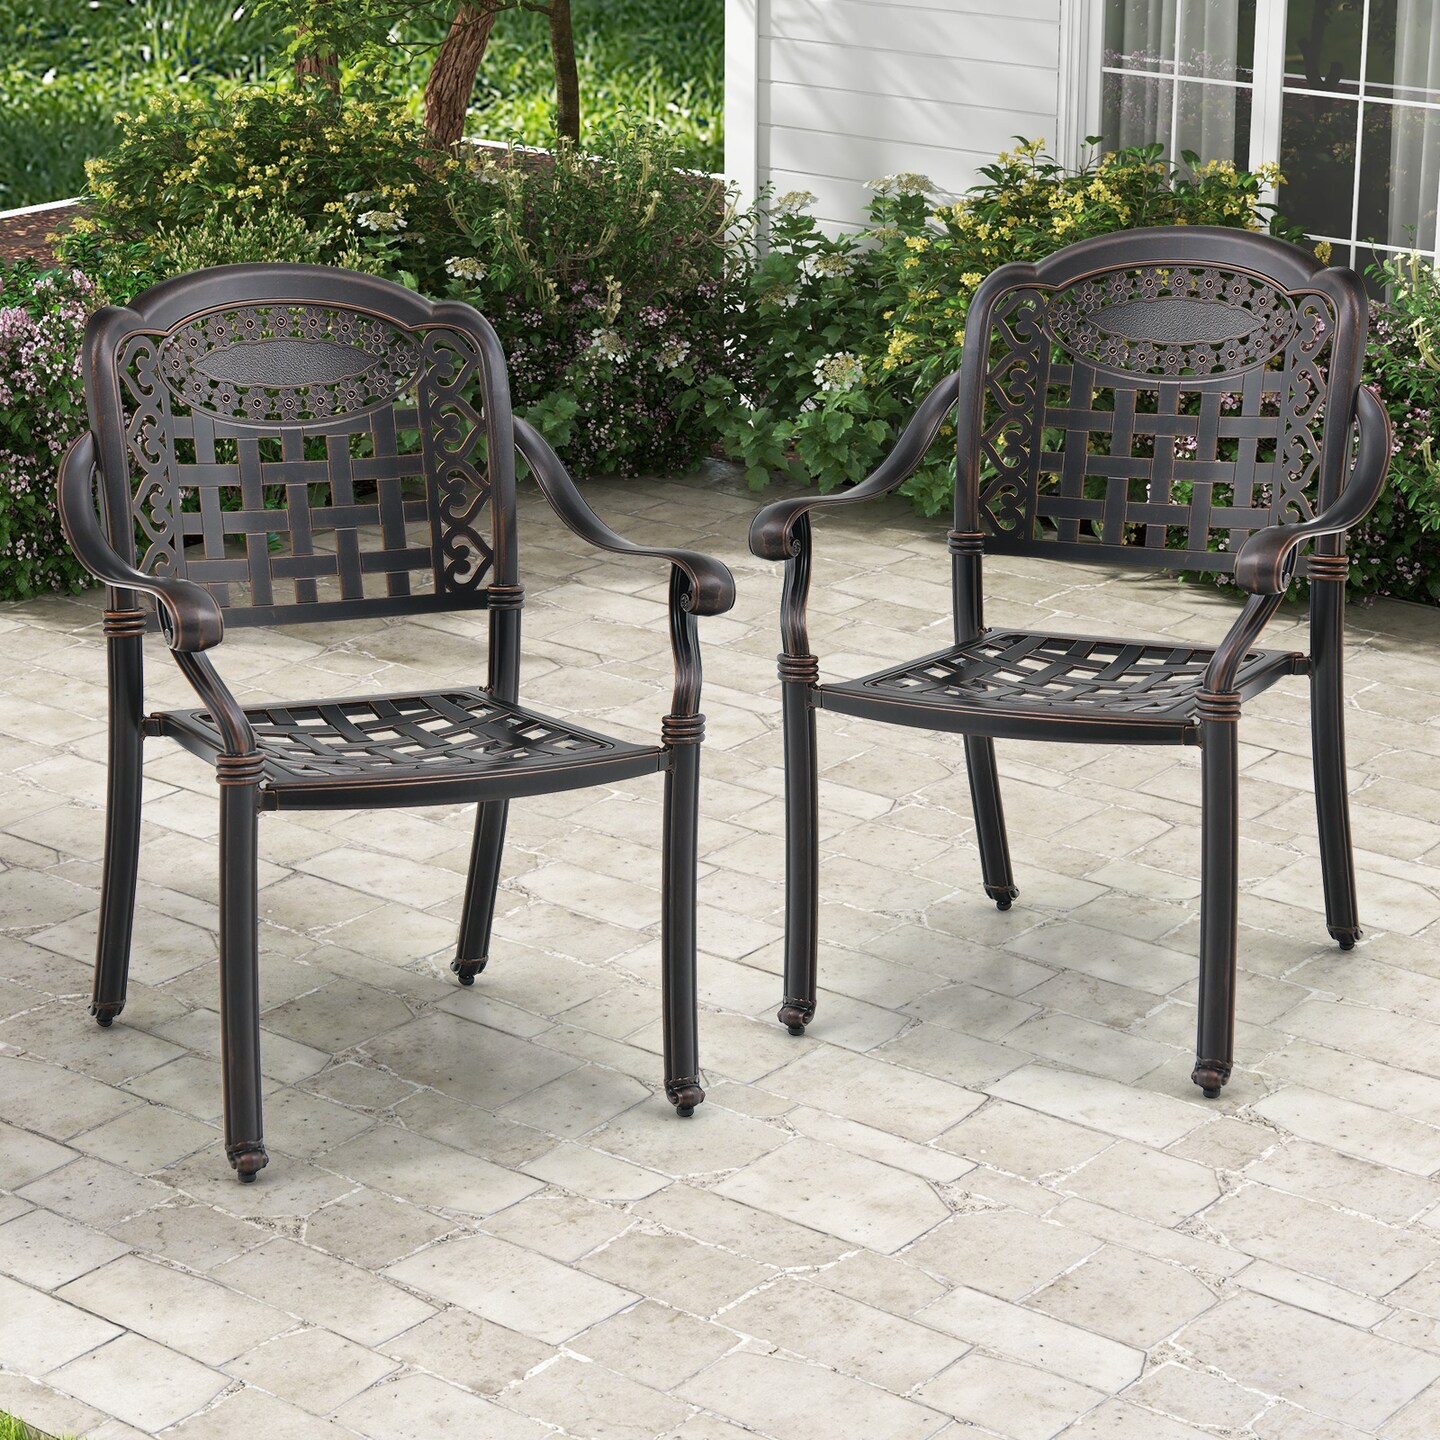 Set Of 2 Cast Aluminum Patio Chairs With Armrests